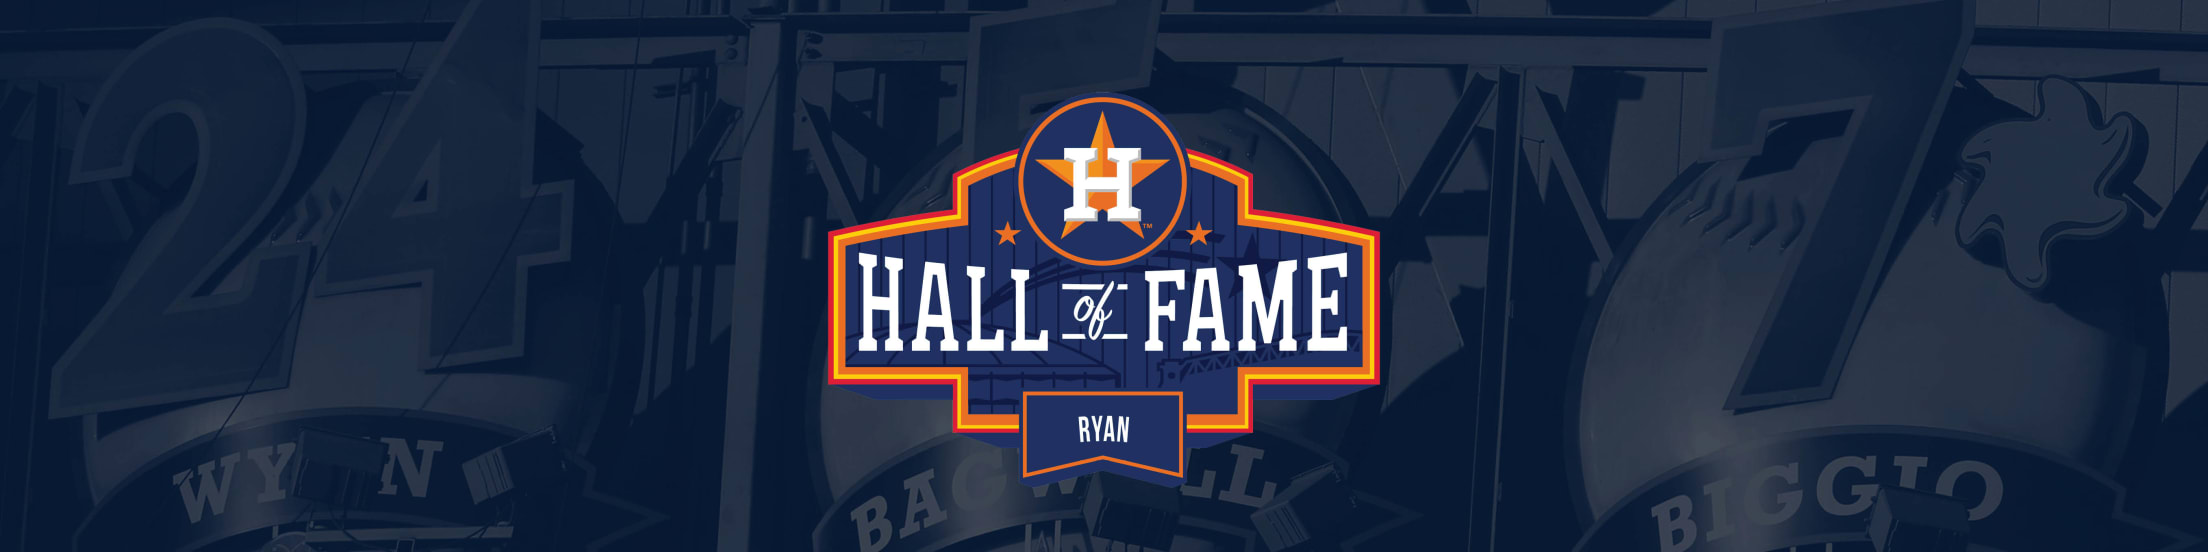 Career in a Year Photos 1999: Nolan Ryan inducted into Baseball Hall of Fame